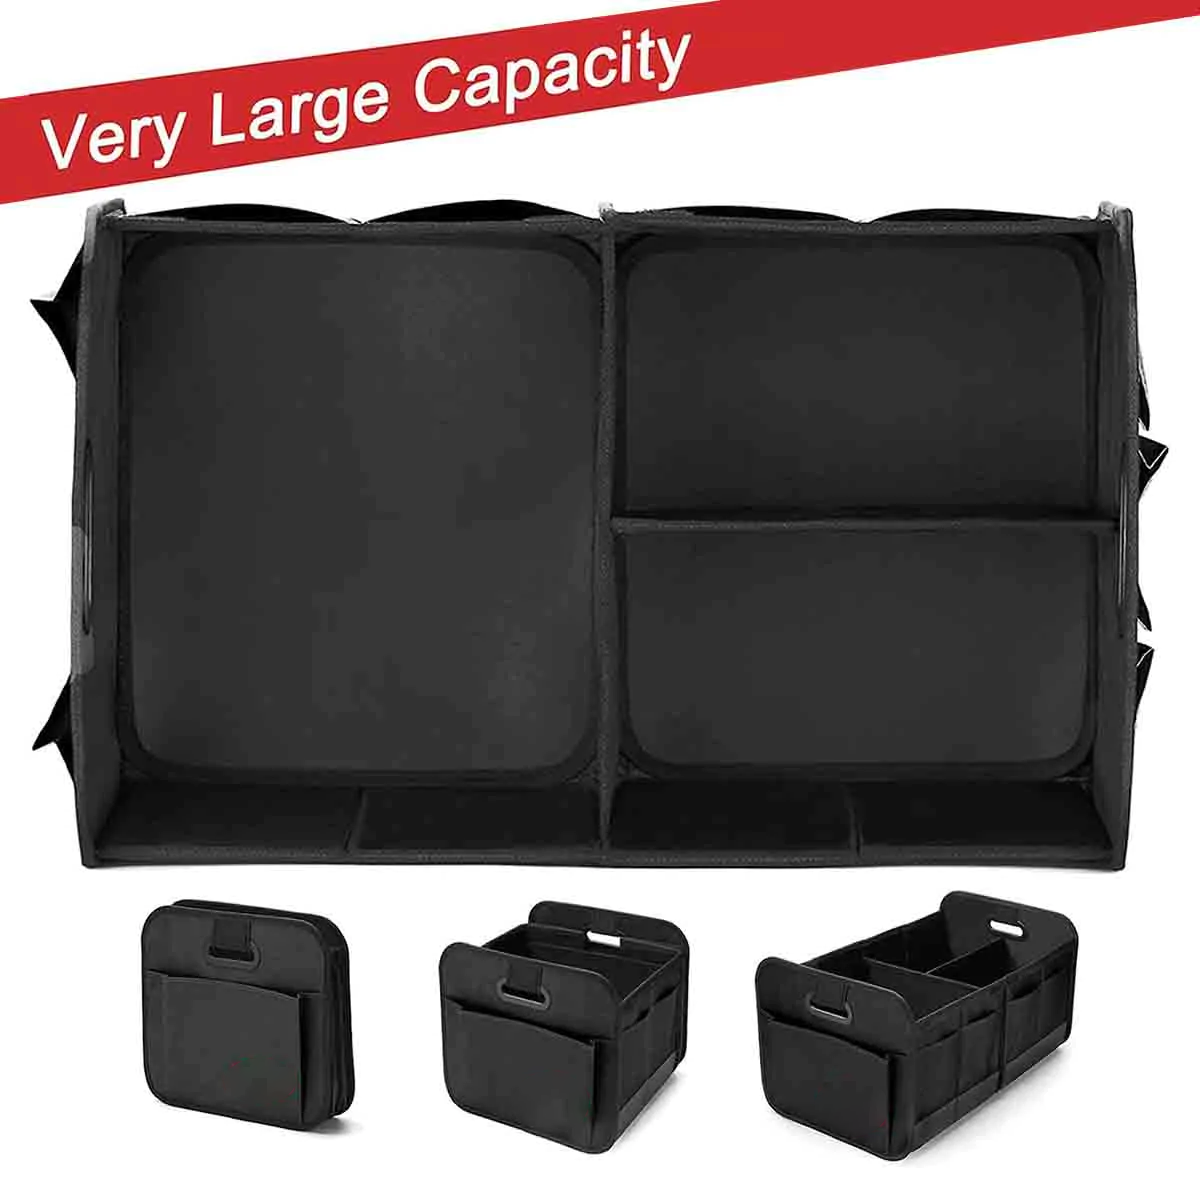 Custom Text For Car Trunk Organizer Storage, Compatible with All Cars, Reinforced Handles, Collapsible Multi, Compartment Car Organizers, Foldable and Waterproof, 600D Oxford Polyester KX12995